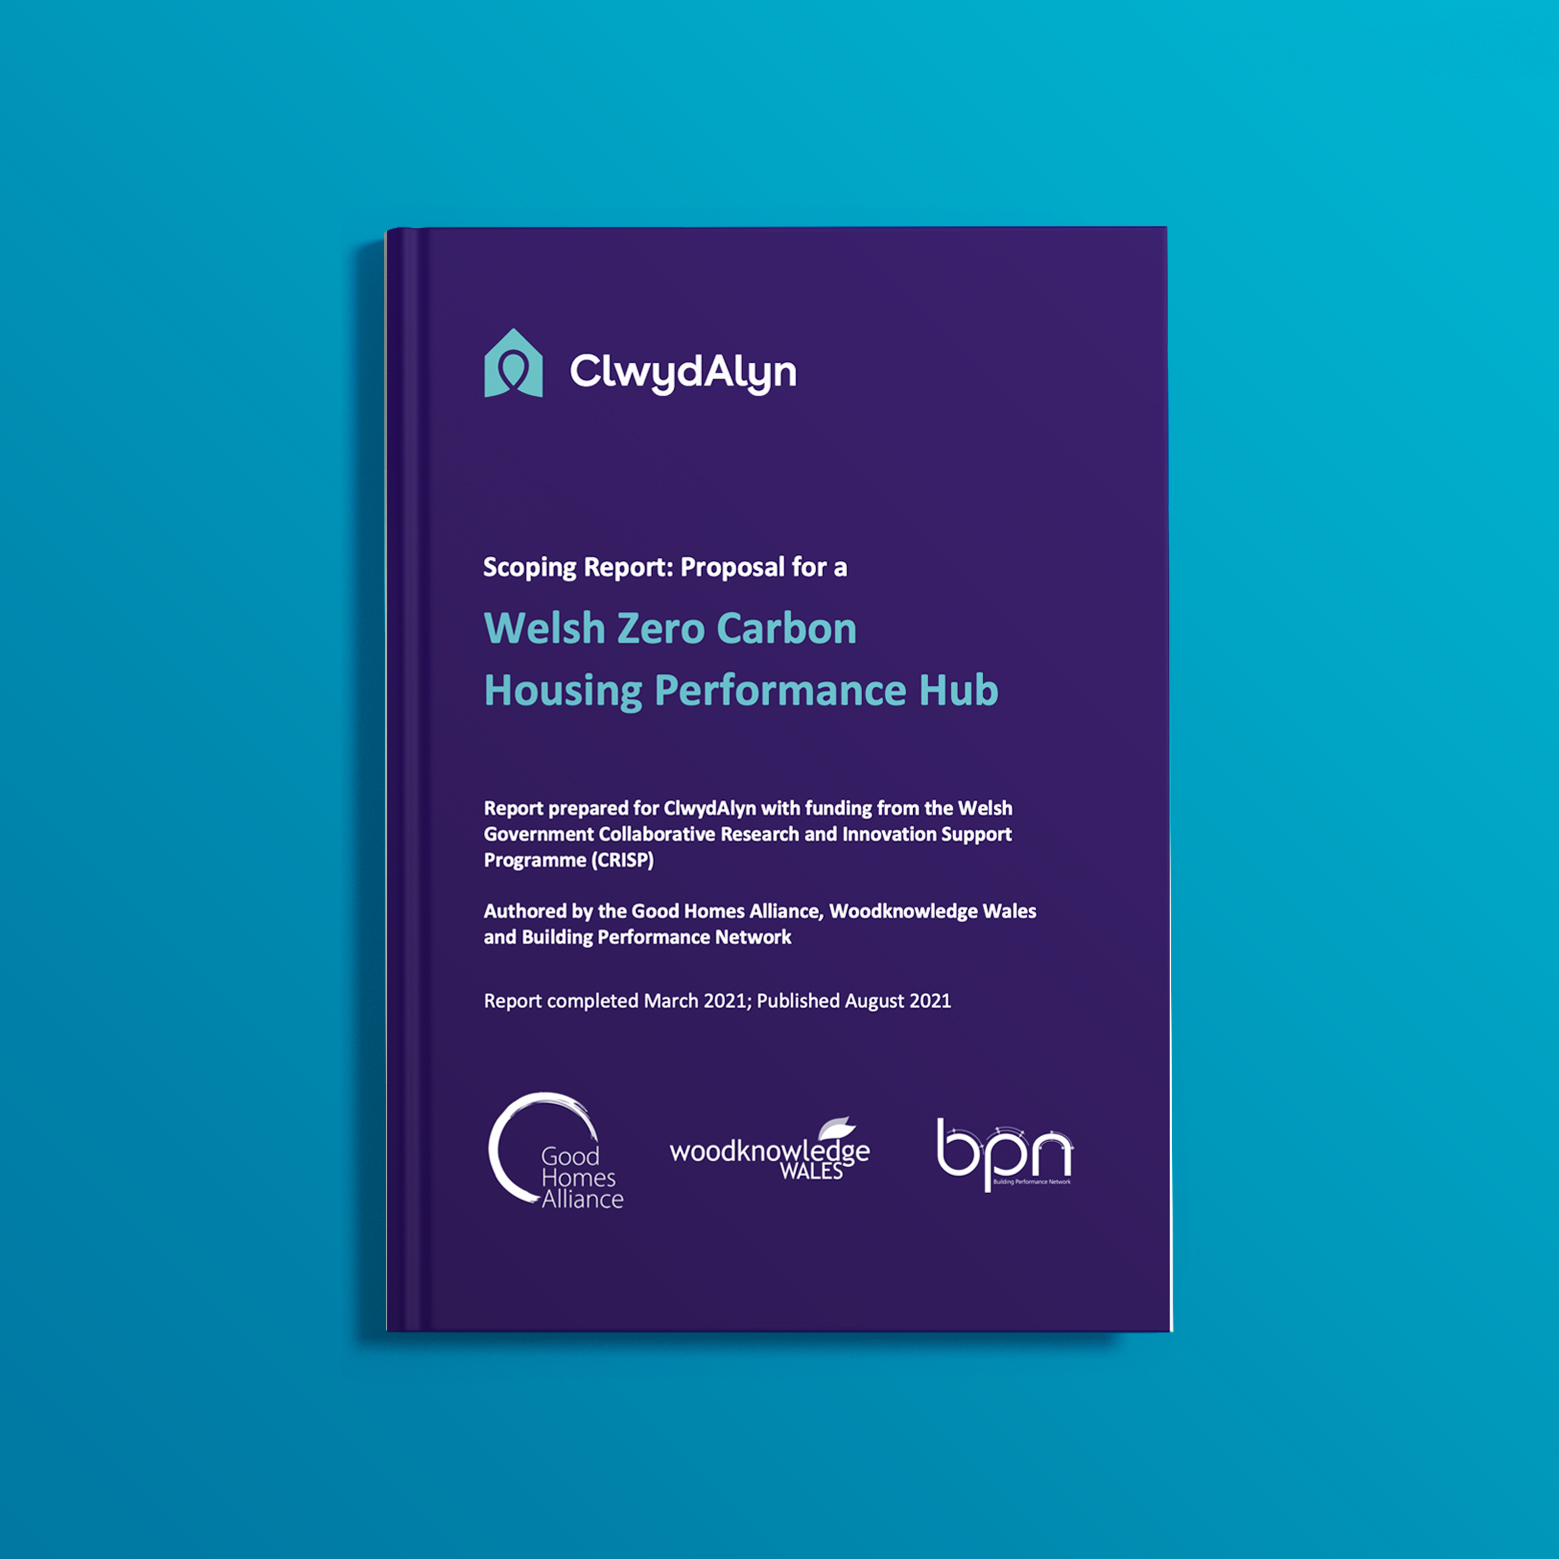 Scoping report published for Welsh Zero Carbon Housing Performance Hub